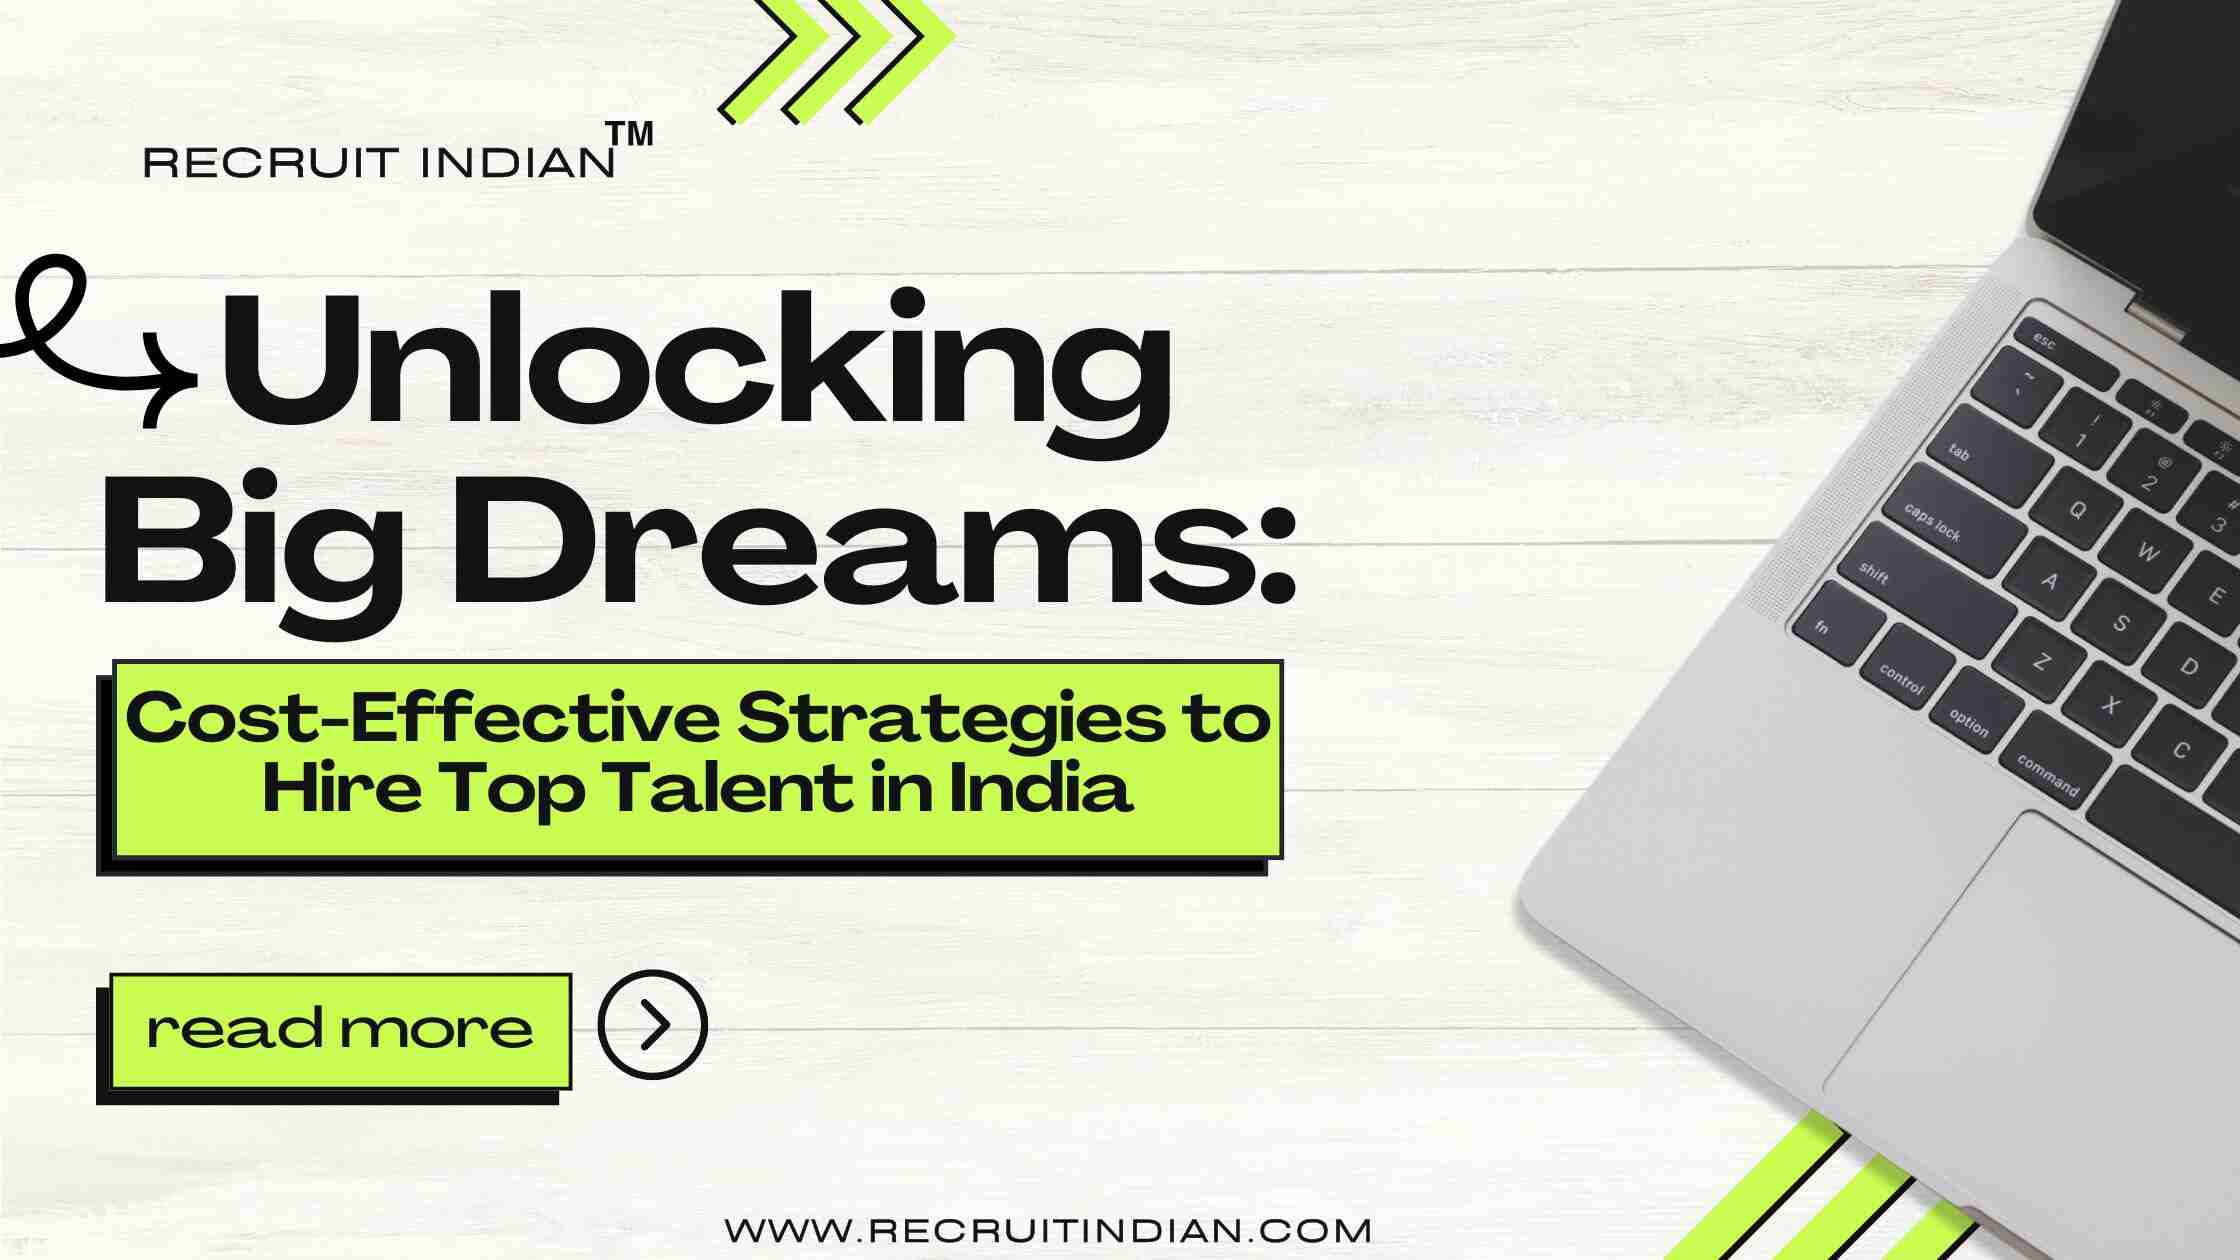 Unlocking Big Dreams: Cost-Effective Strategies to Hire Top Talent in India